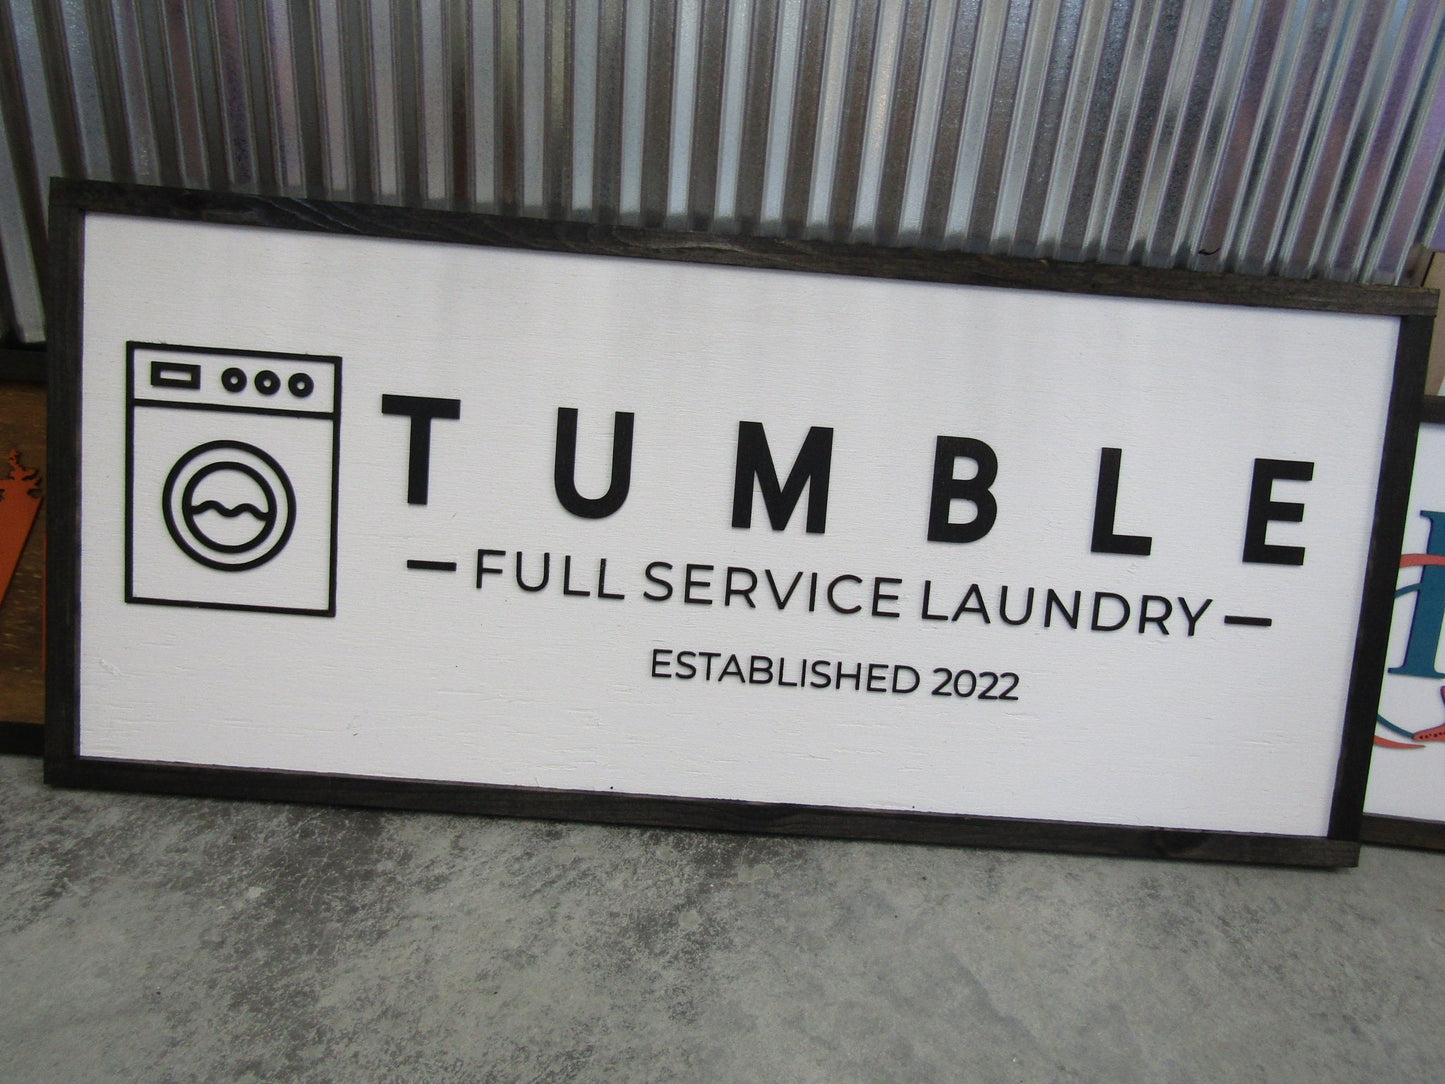 Laundromat Laundry Wash And Dry Full Service Commerical Signage Business Professional Wooden Raised Letters Oversized Sign Handmade Custom